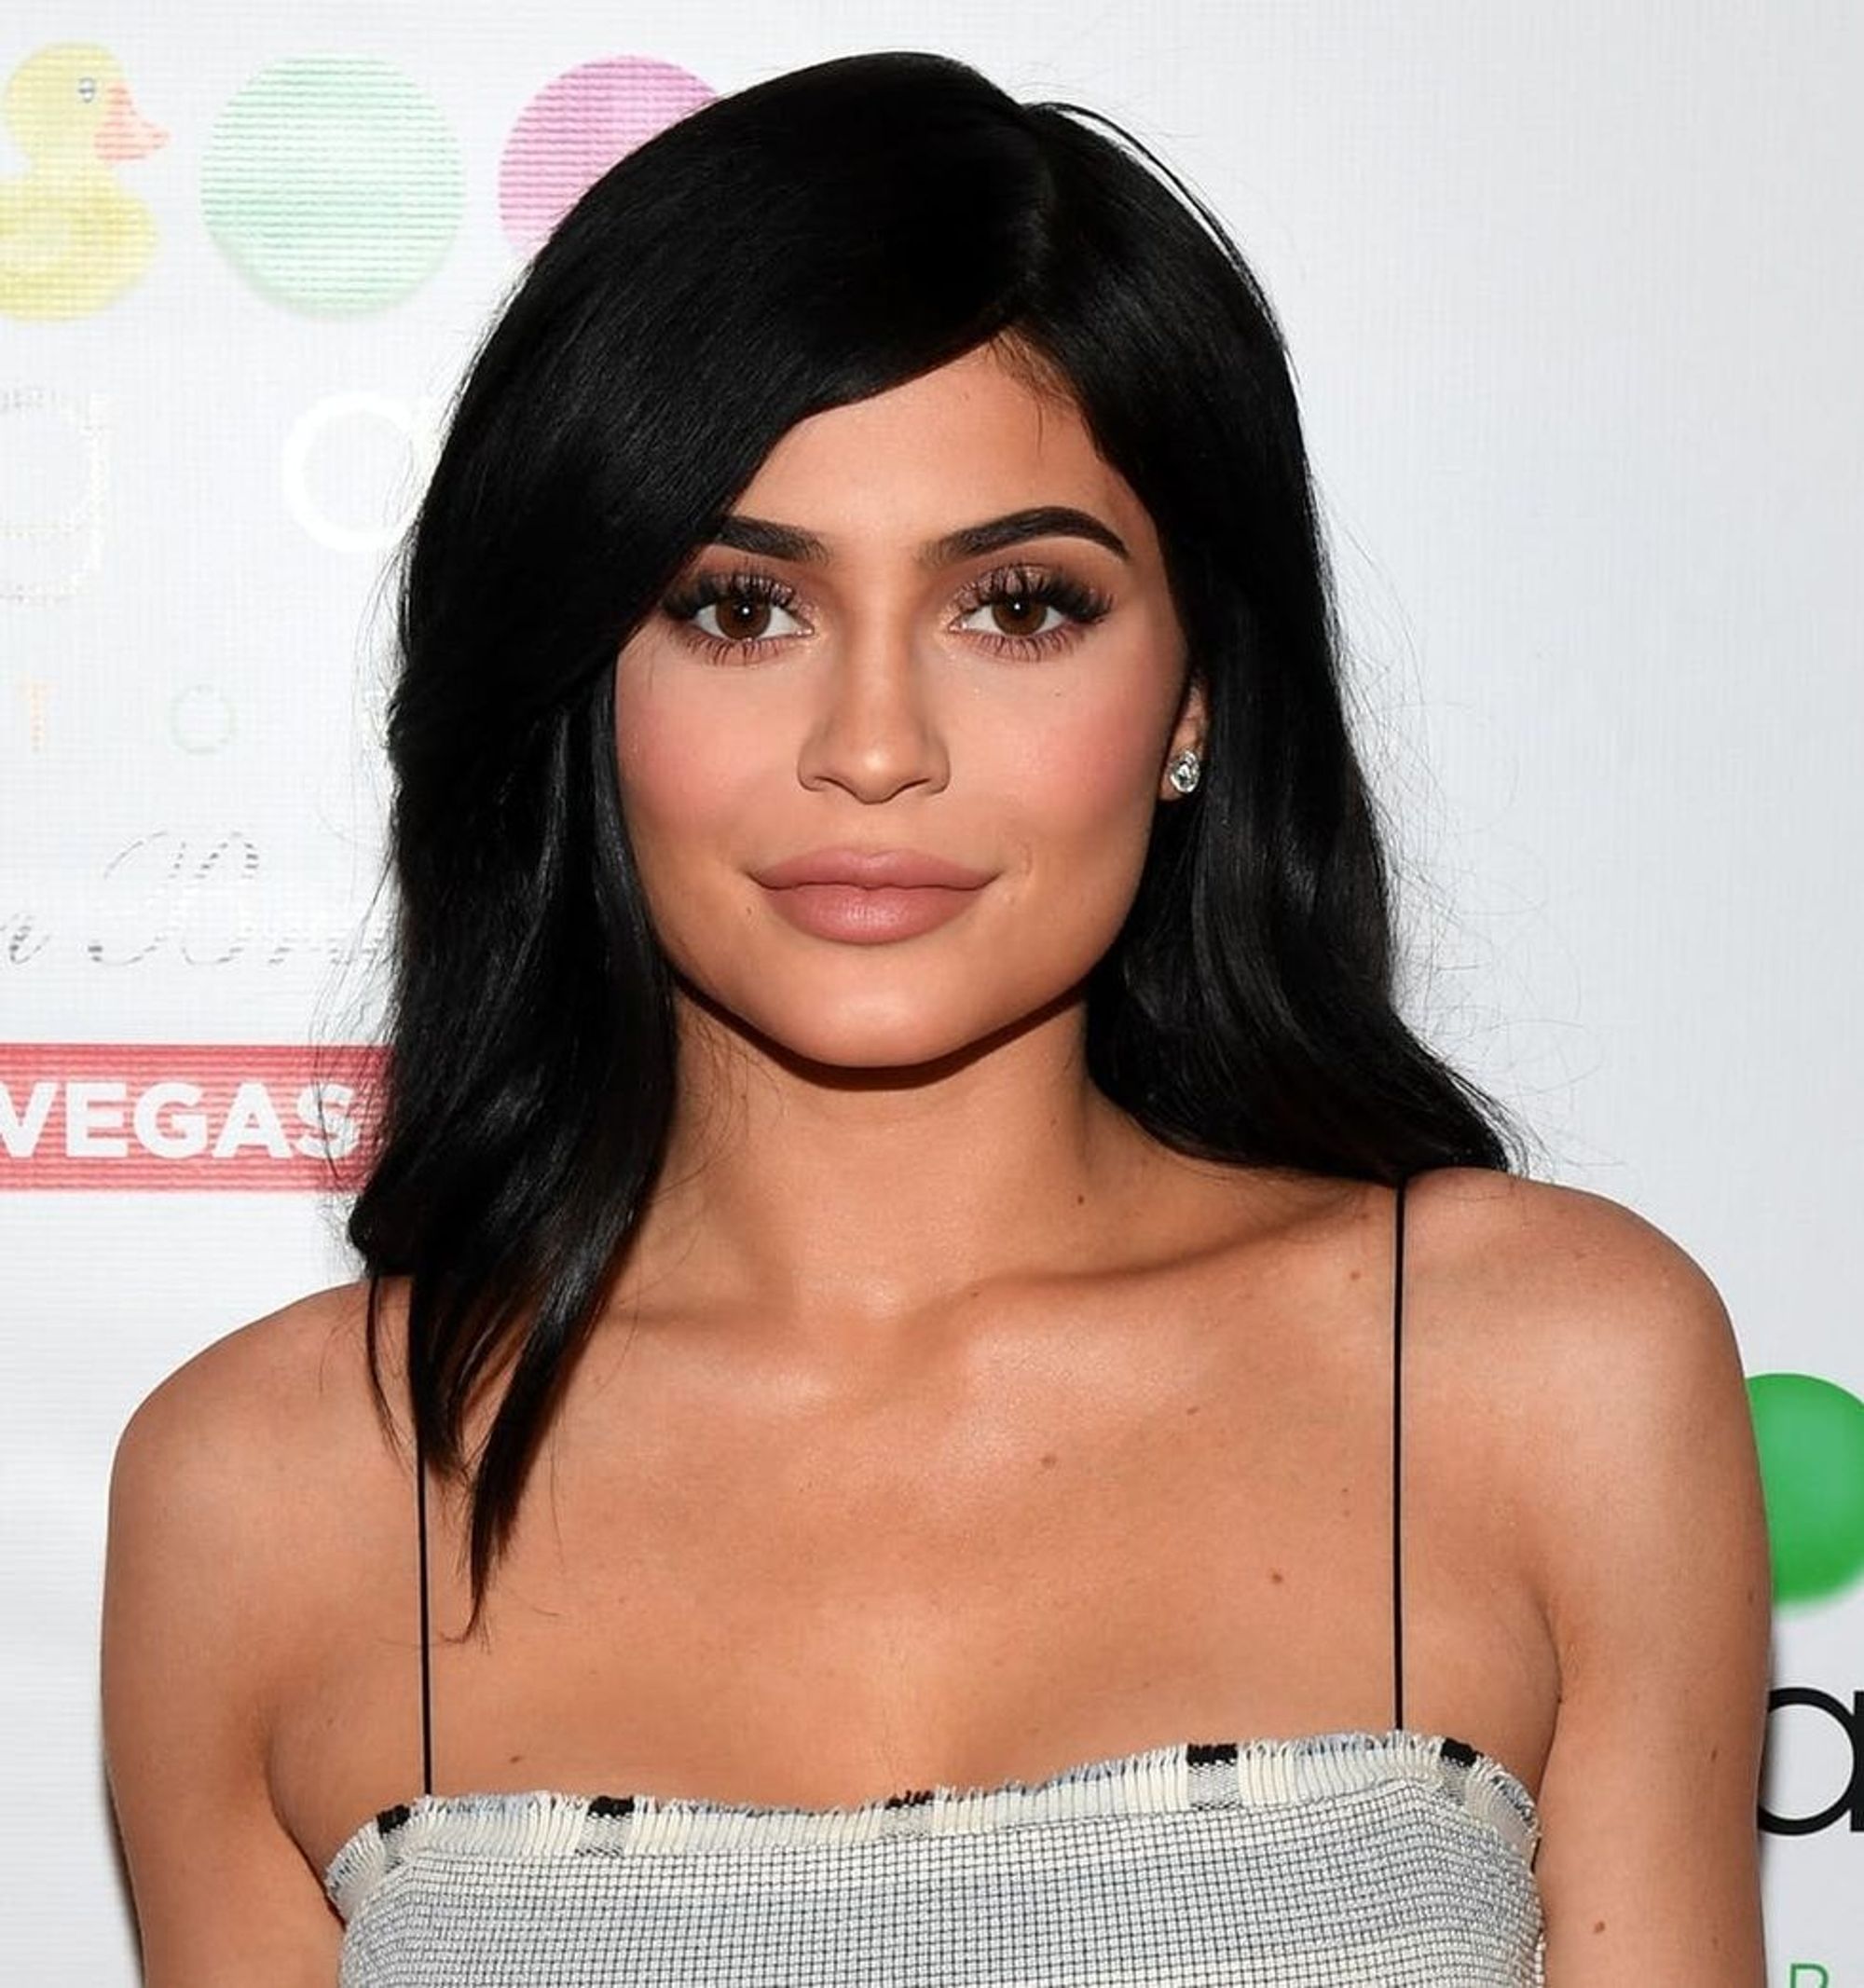 Kylie Jenner Reveals Her Baby Daughter’s Name and Shares a Sweet New ...